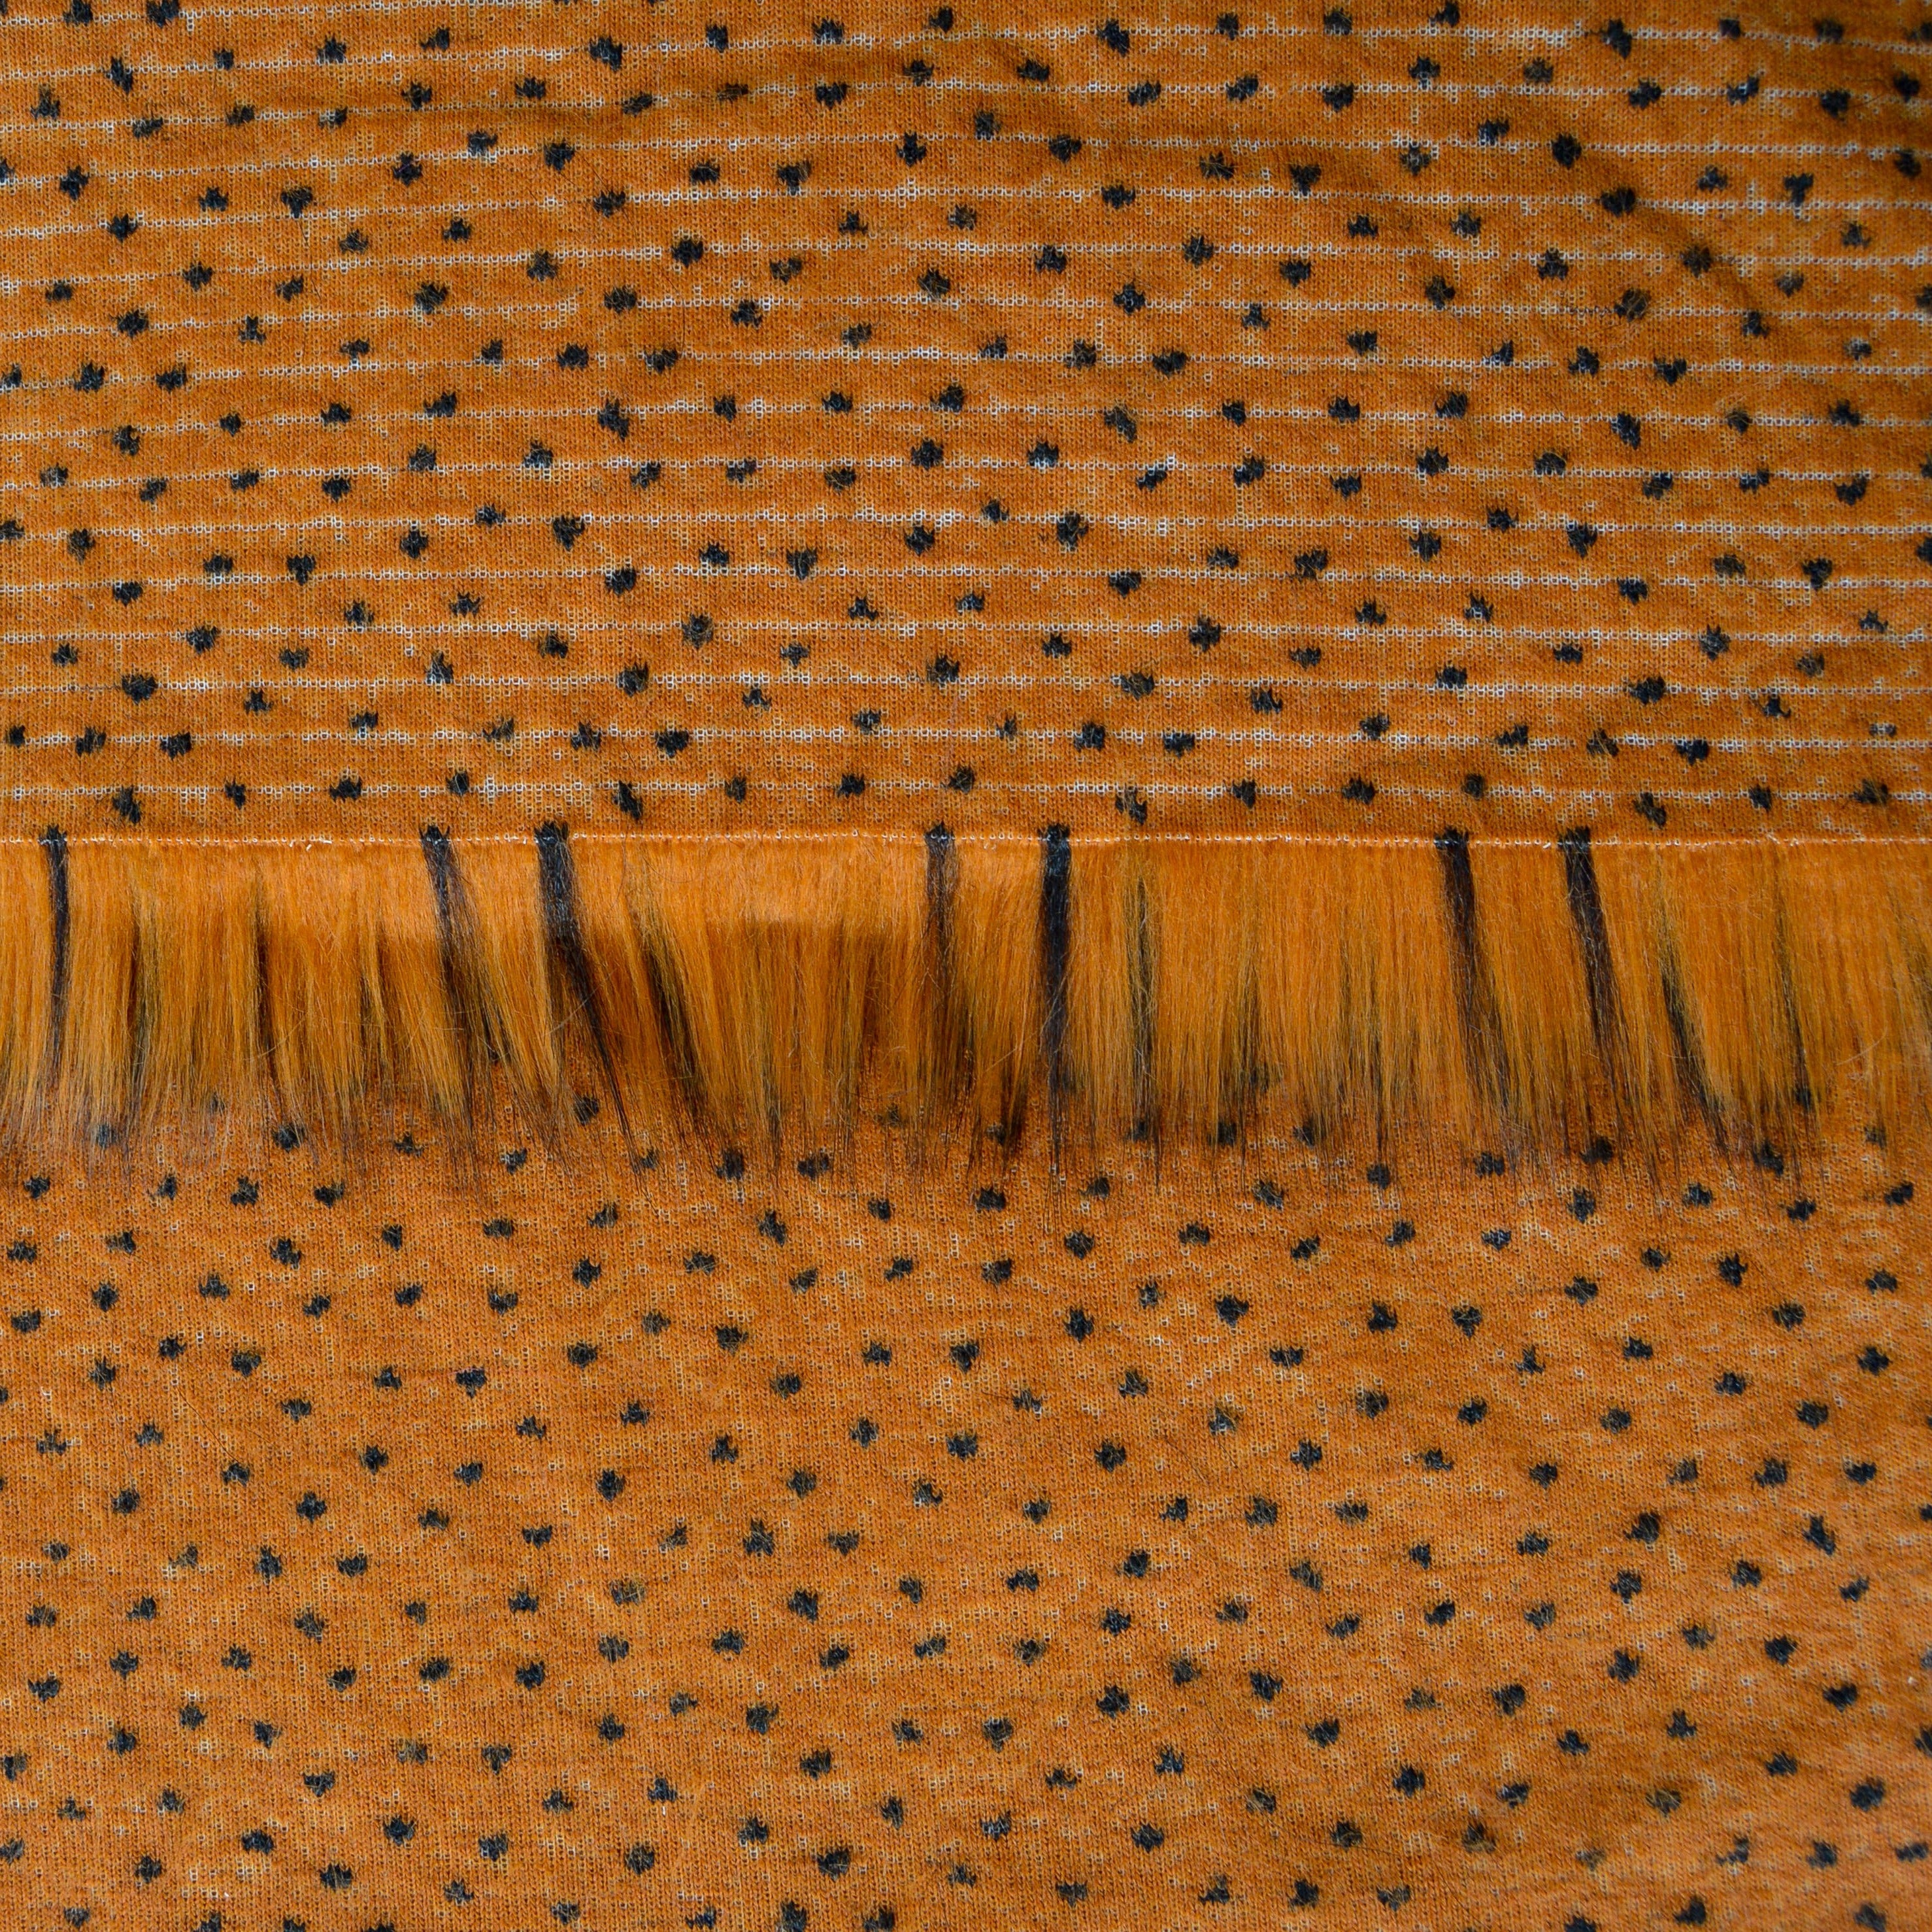 Backing of toffee brown faux fur fabric showing the long pile length of the fake fur.